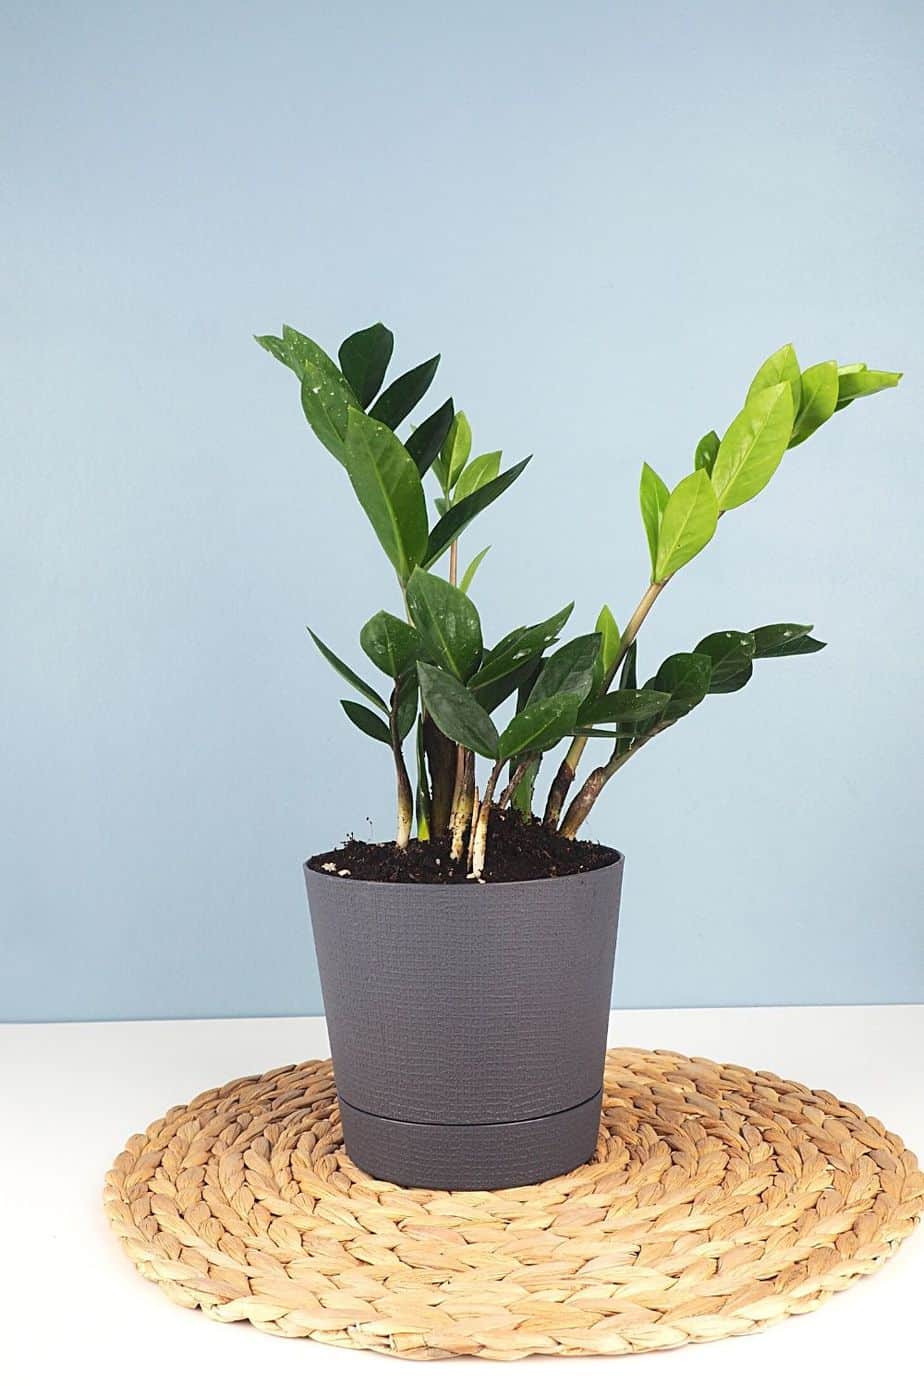 ZZ plants can grow about 12 inches in a season, but it's extremely rare as they're slow growers